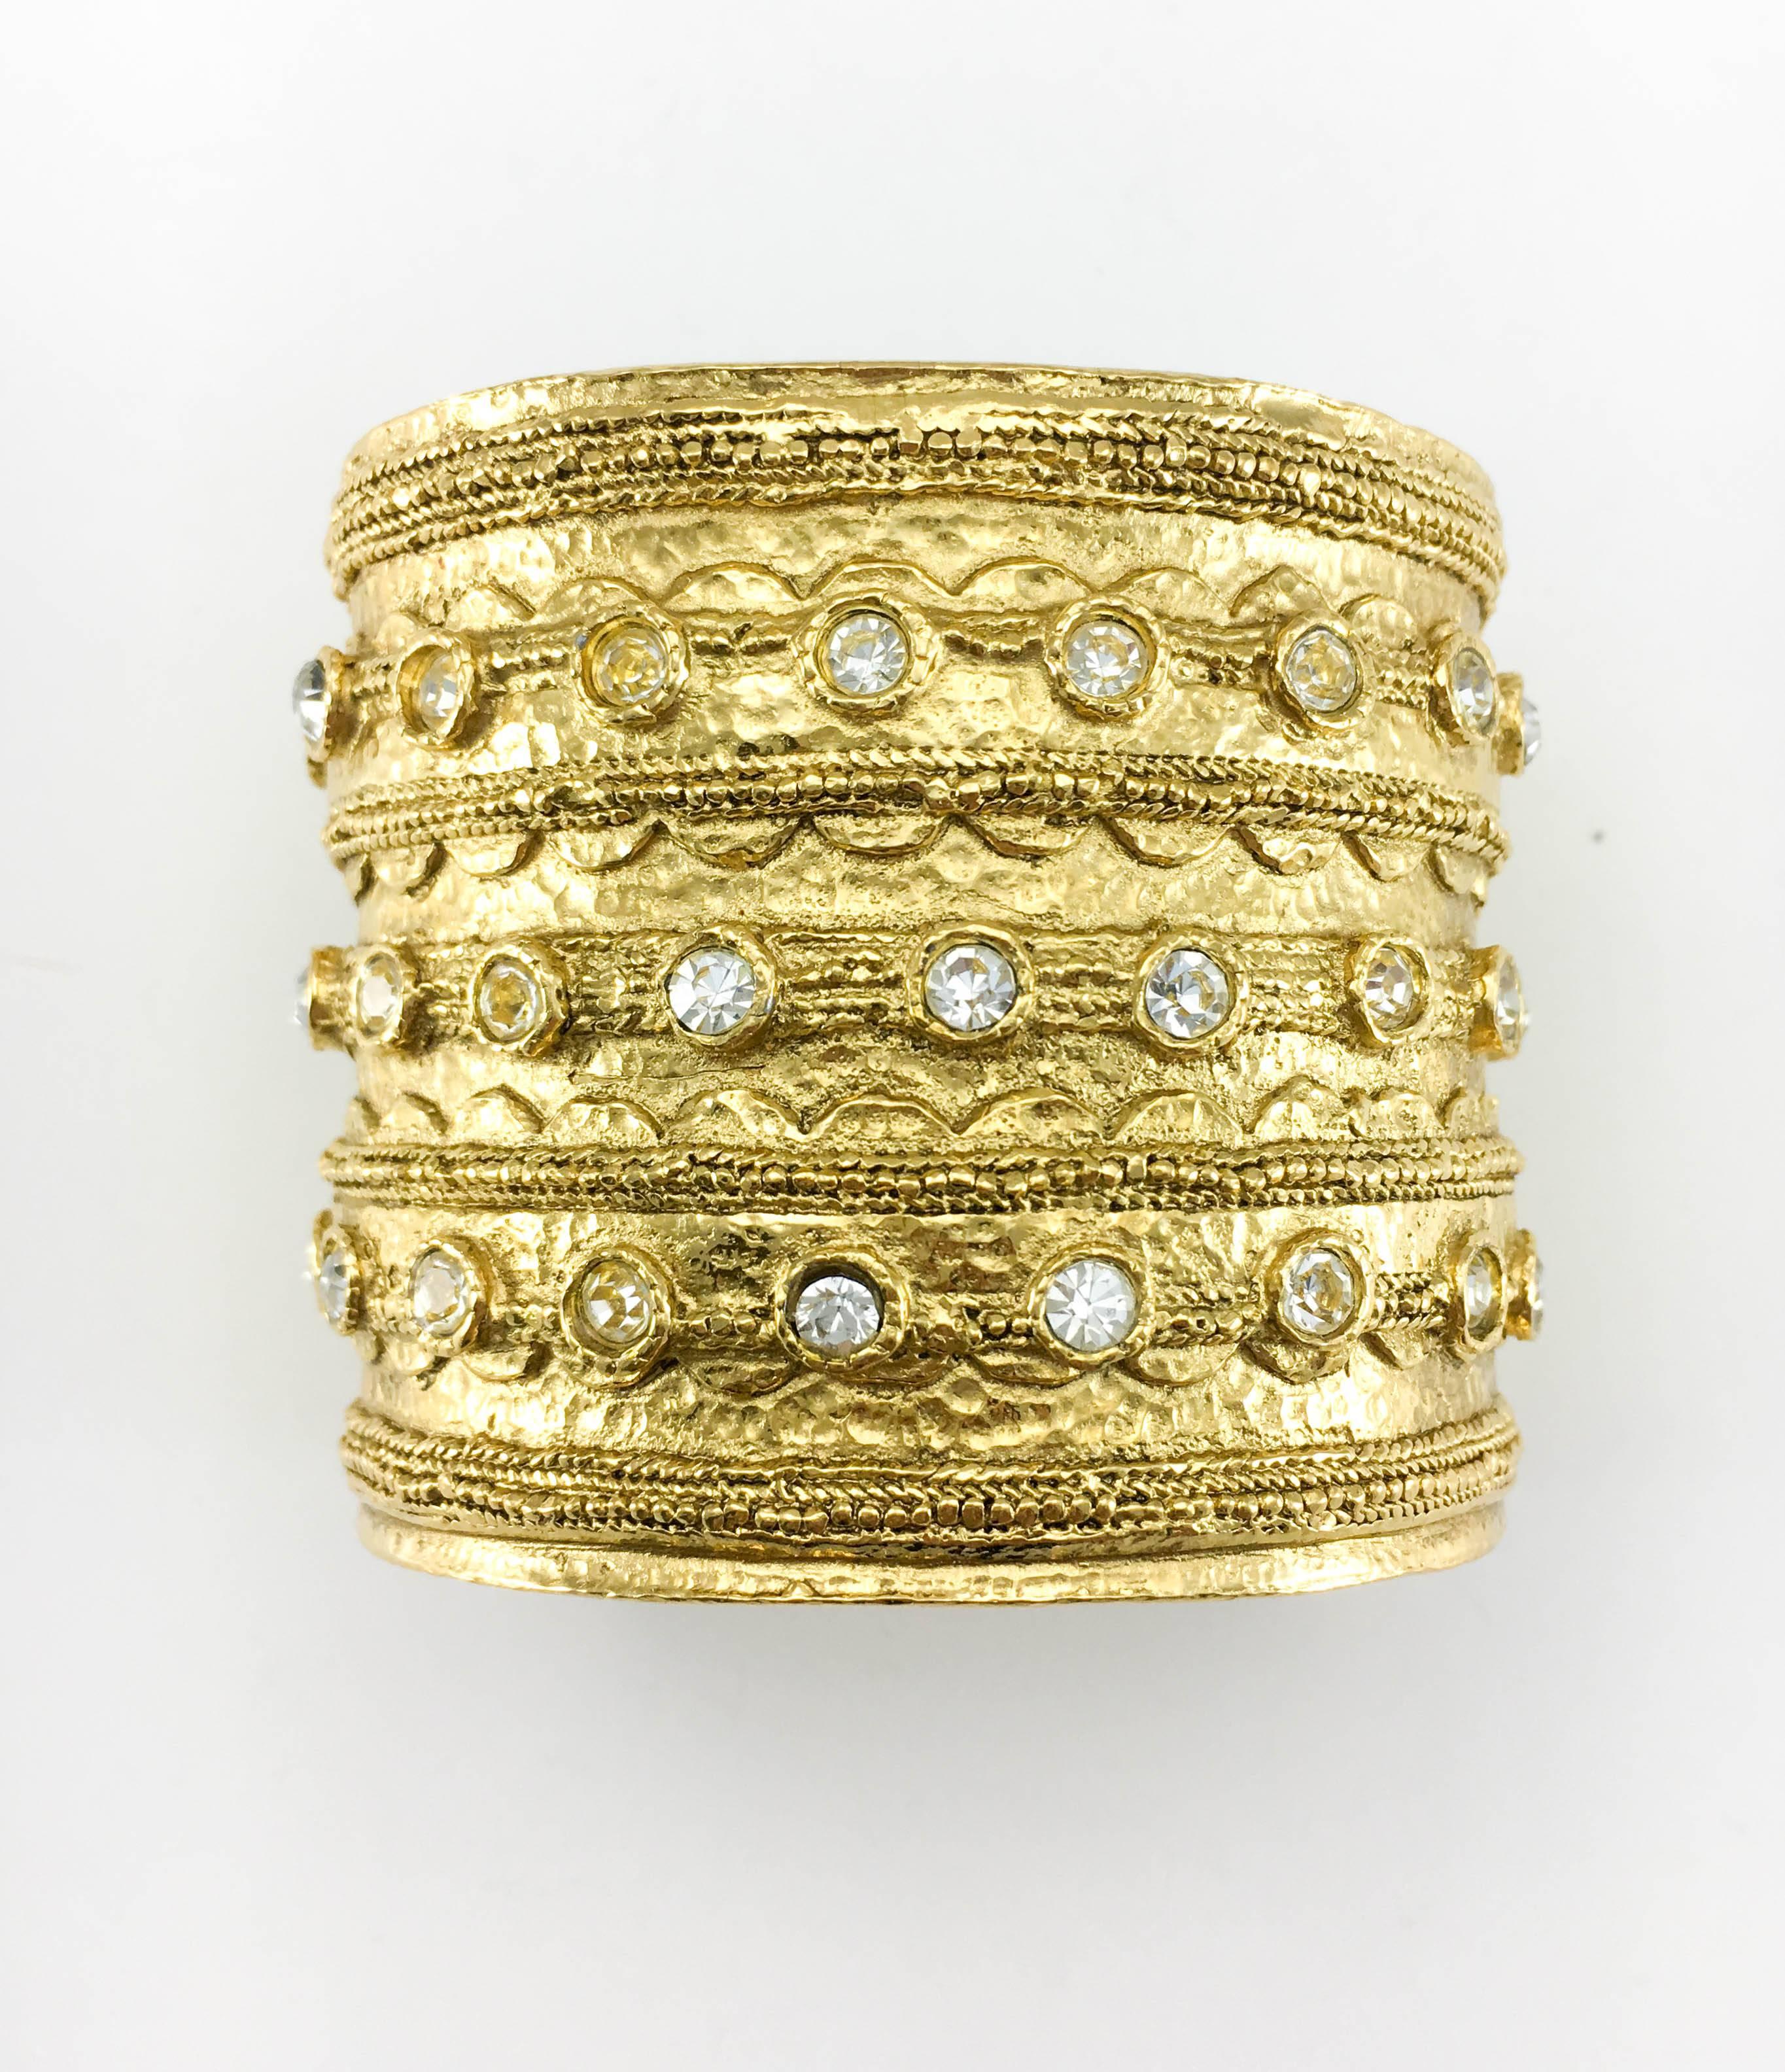 1980's Chanel 'Etruscan' Rhinestone Embellished Gold-Plated Cuff Bracelet For Sale 1